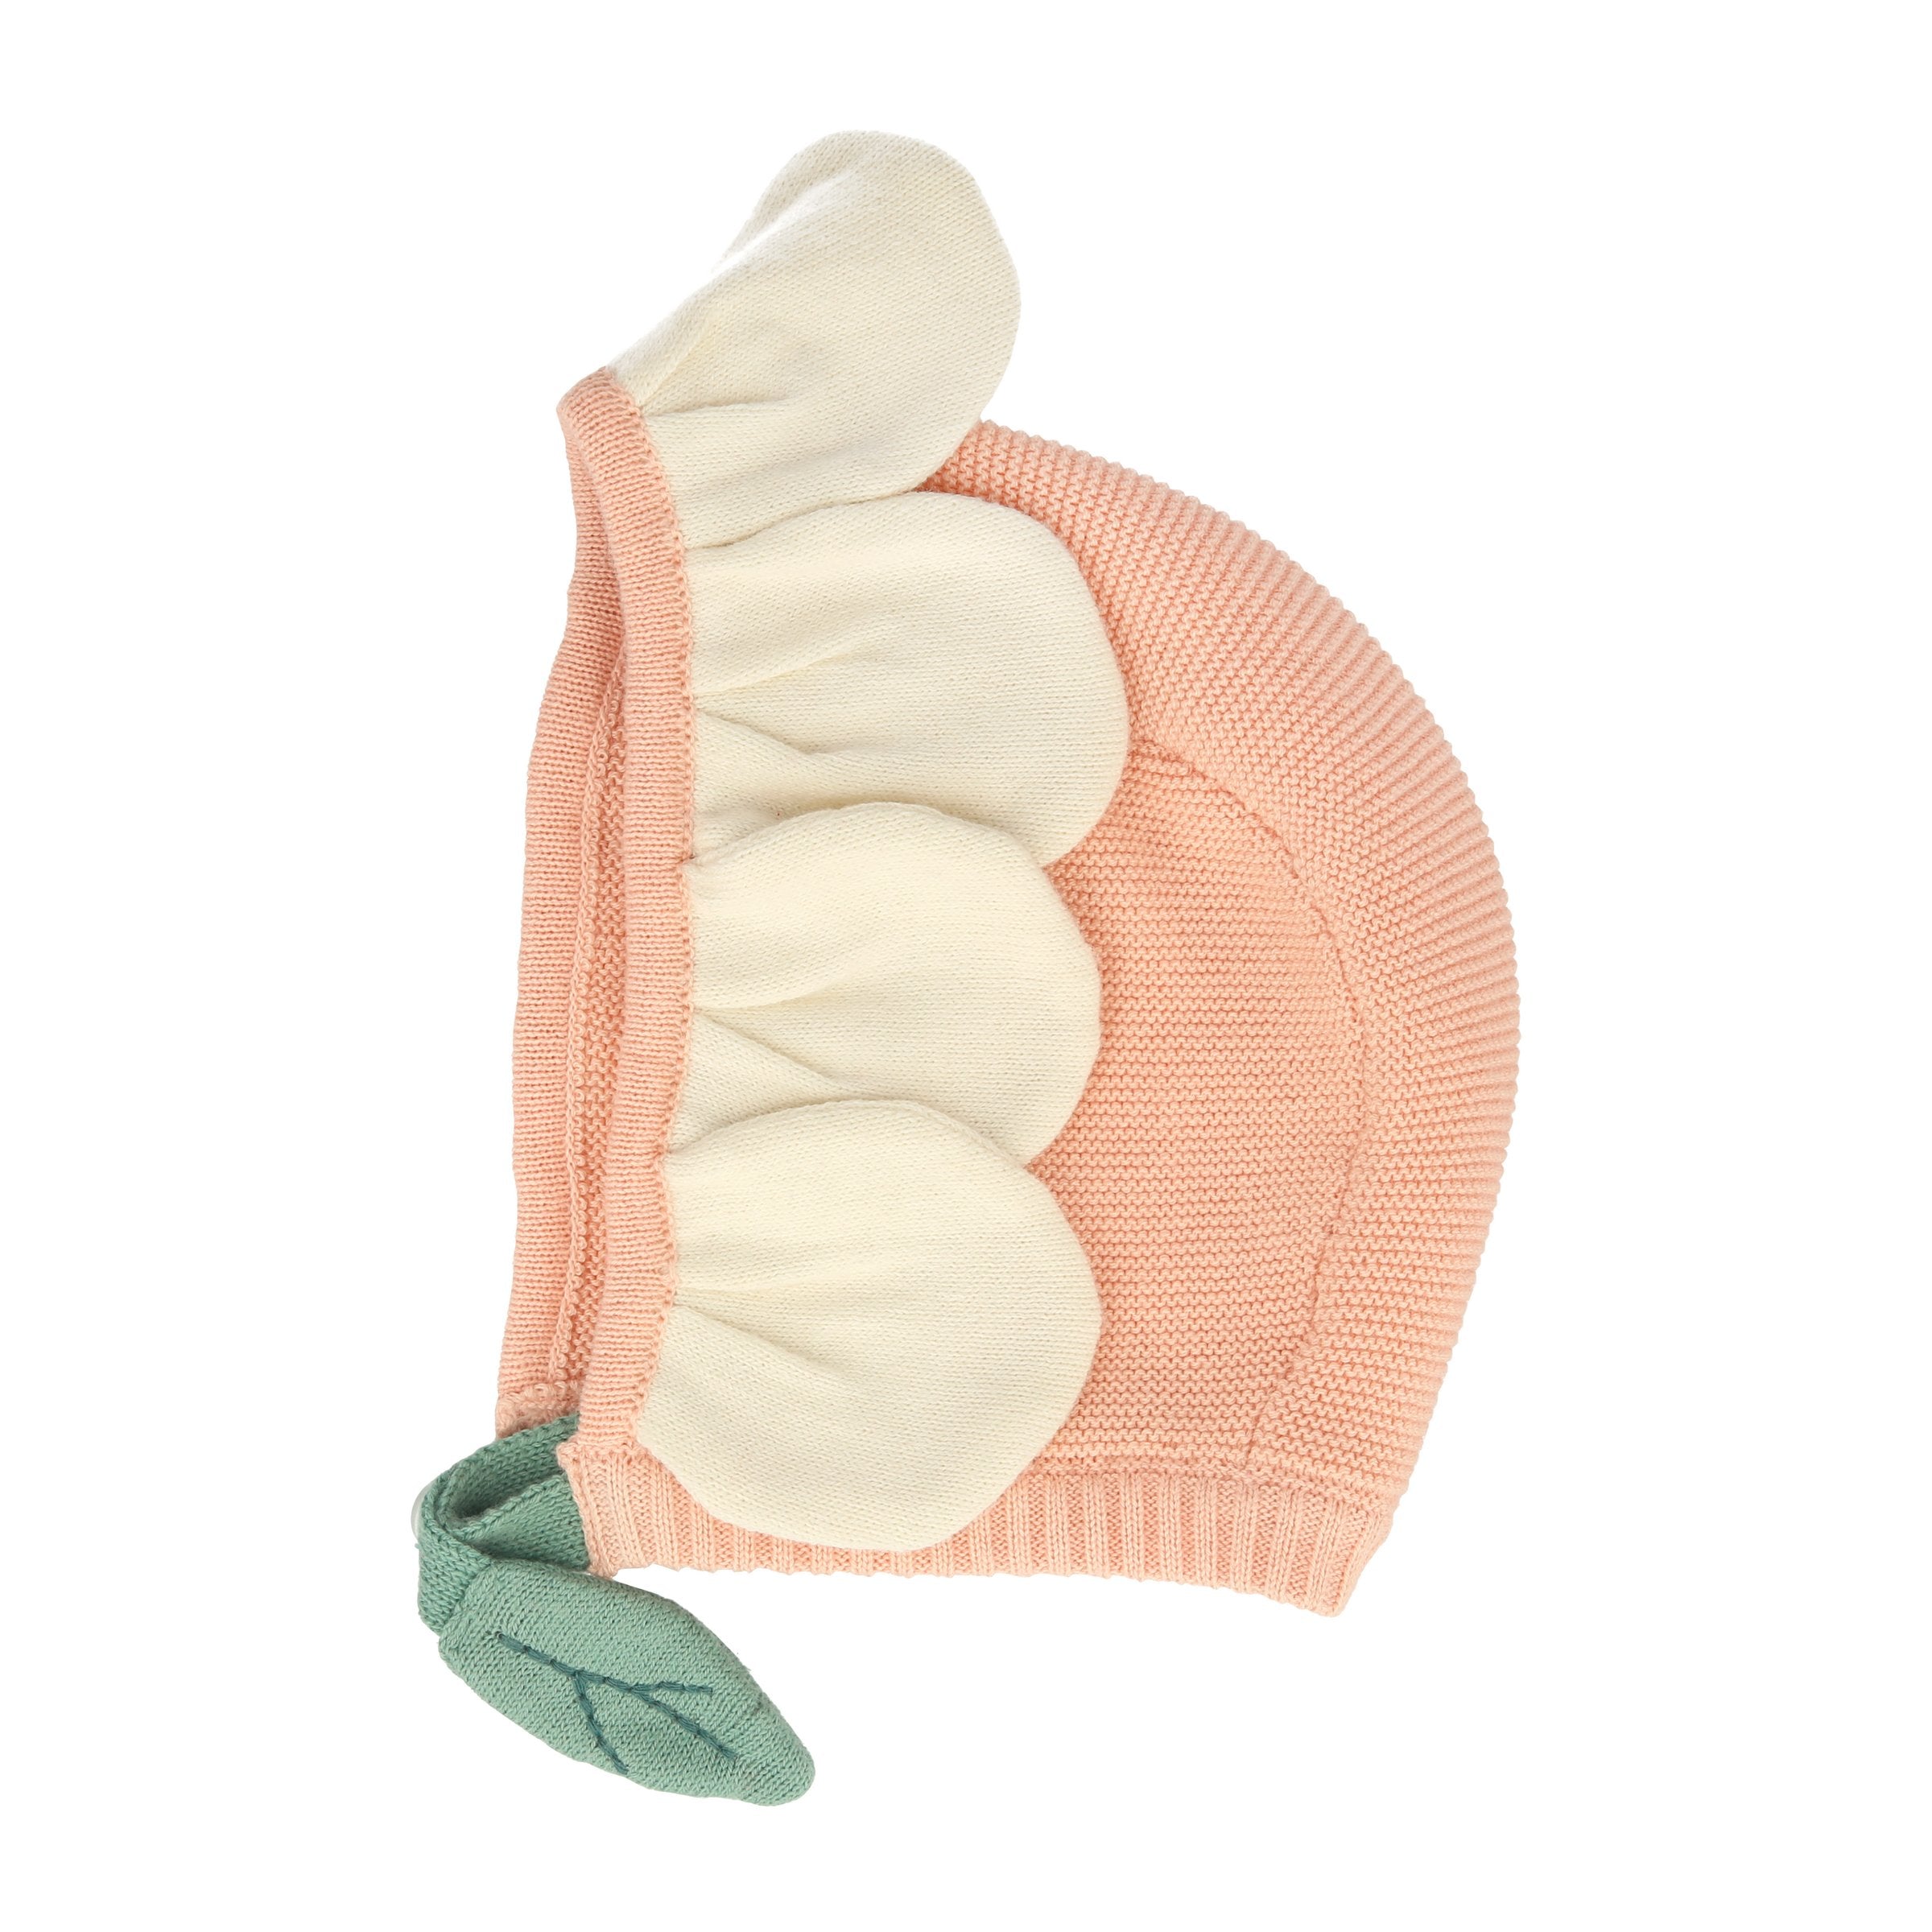 This peach daisy baby bonnet is crafted from organic cotton, with cream petals, green leaf detail and ivory coloured buttons.